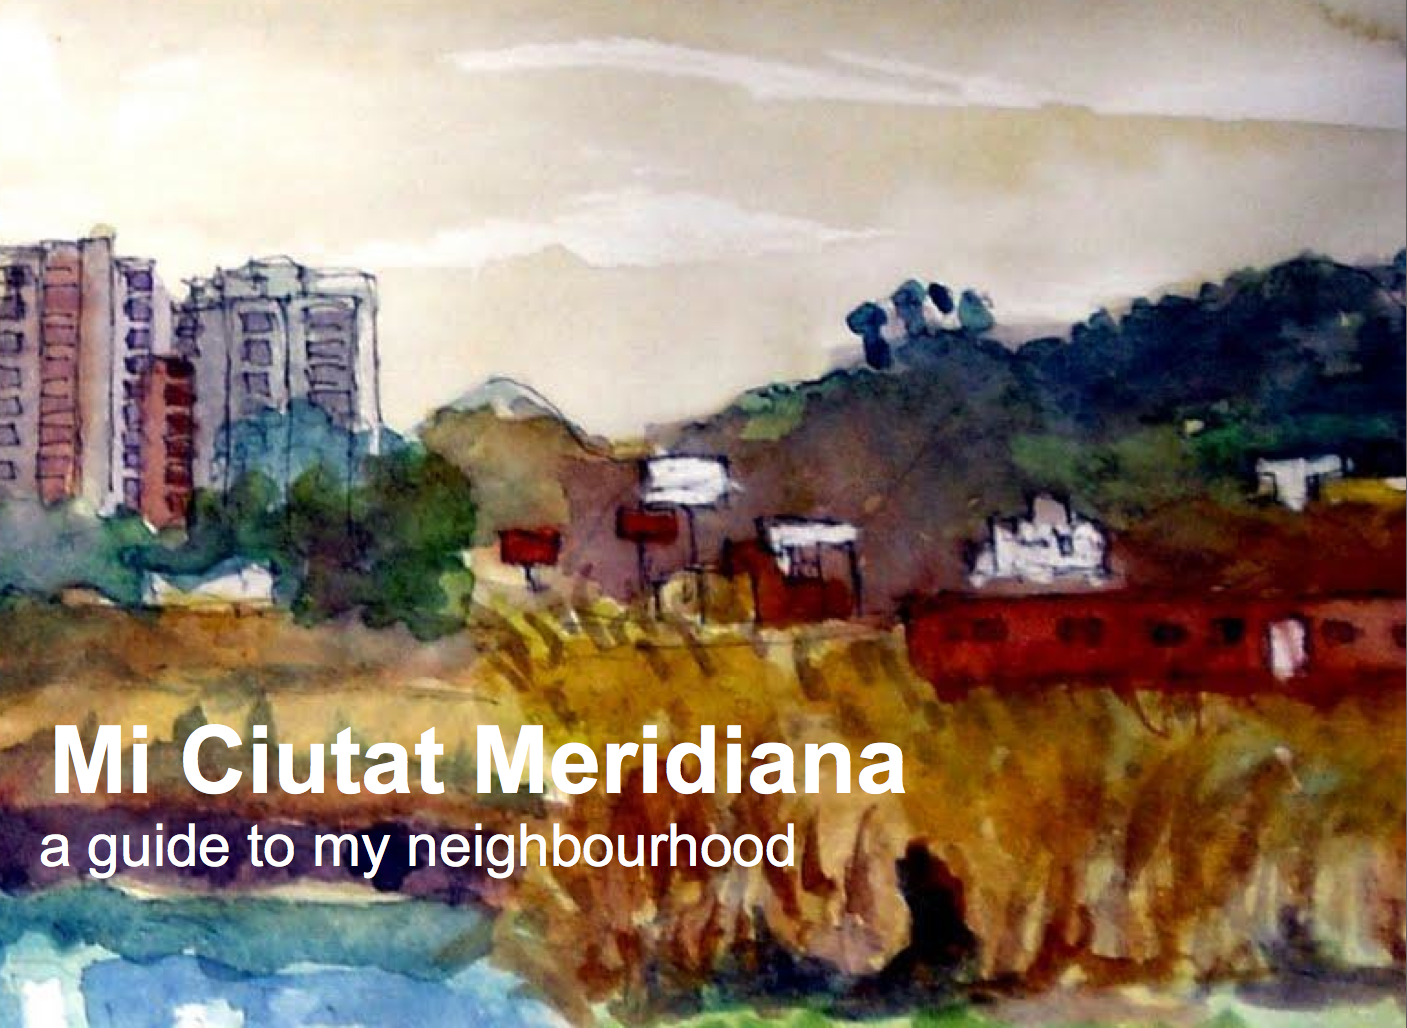 Students call on community participation in Ciutat Meridiana